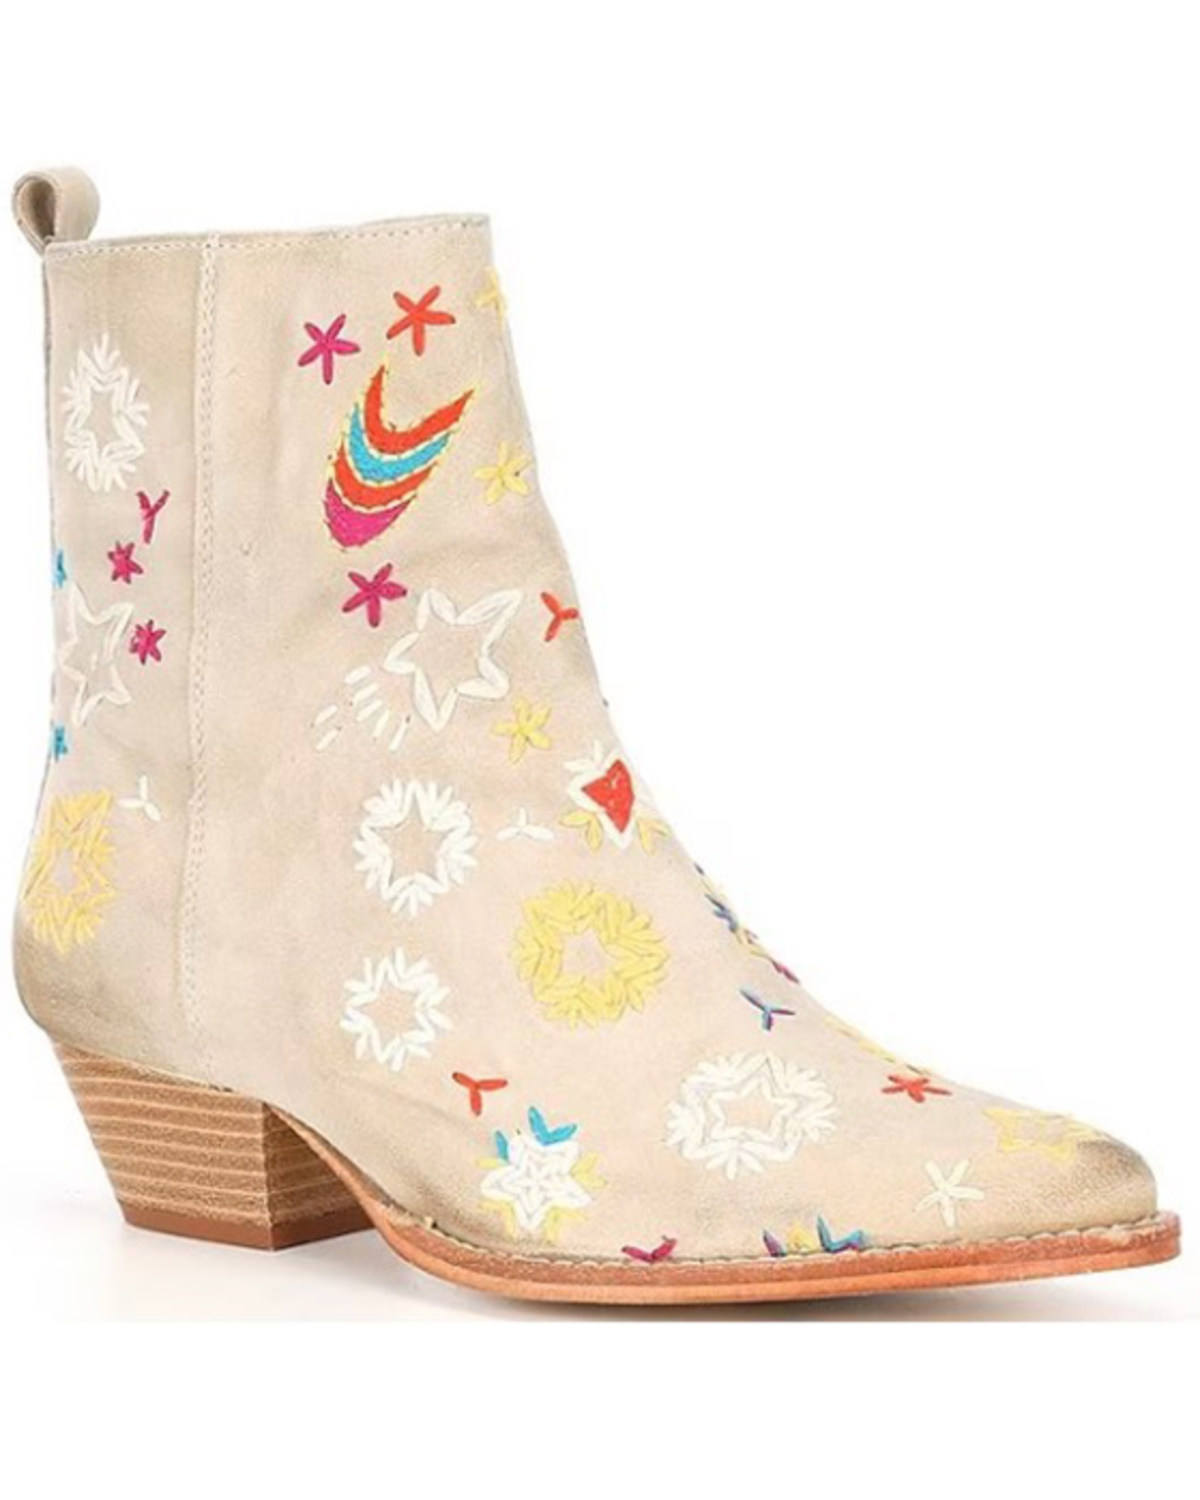 Free People Women's Bowers Embroidered Western Boots - Pointed Toe